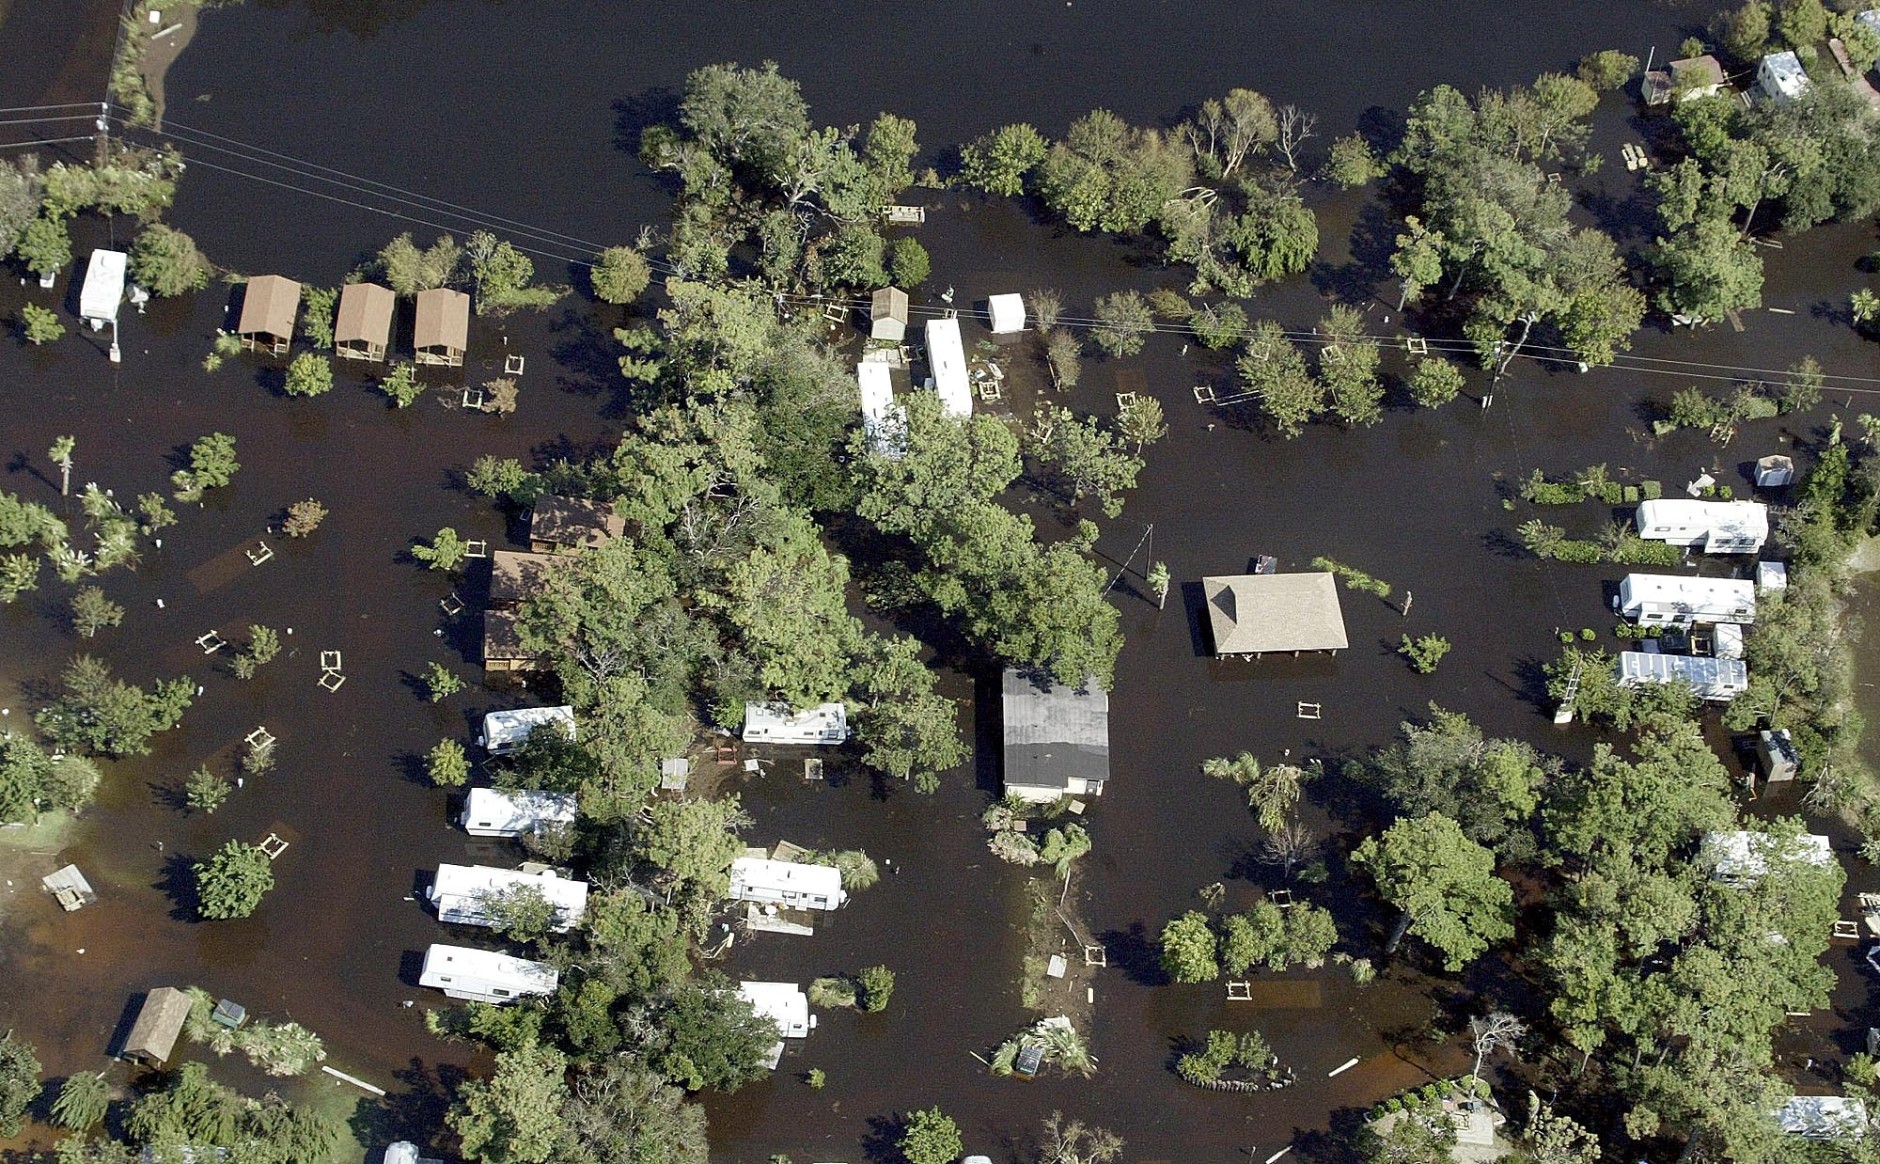 Flood waters surround homes in Buxton, N.C., Friday Sept. 19, 2003 after flooding from Hurricane Isabel. (AP Photo/Chuck Burton)